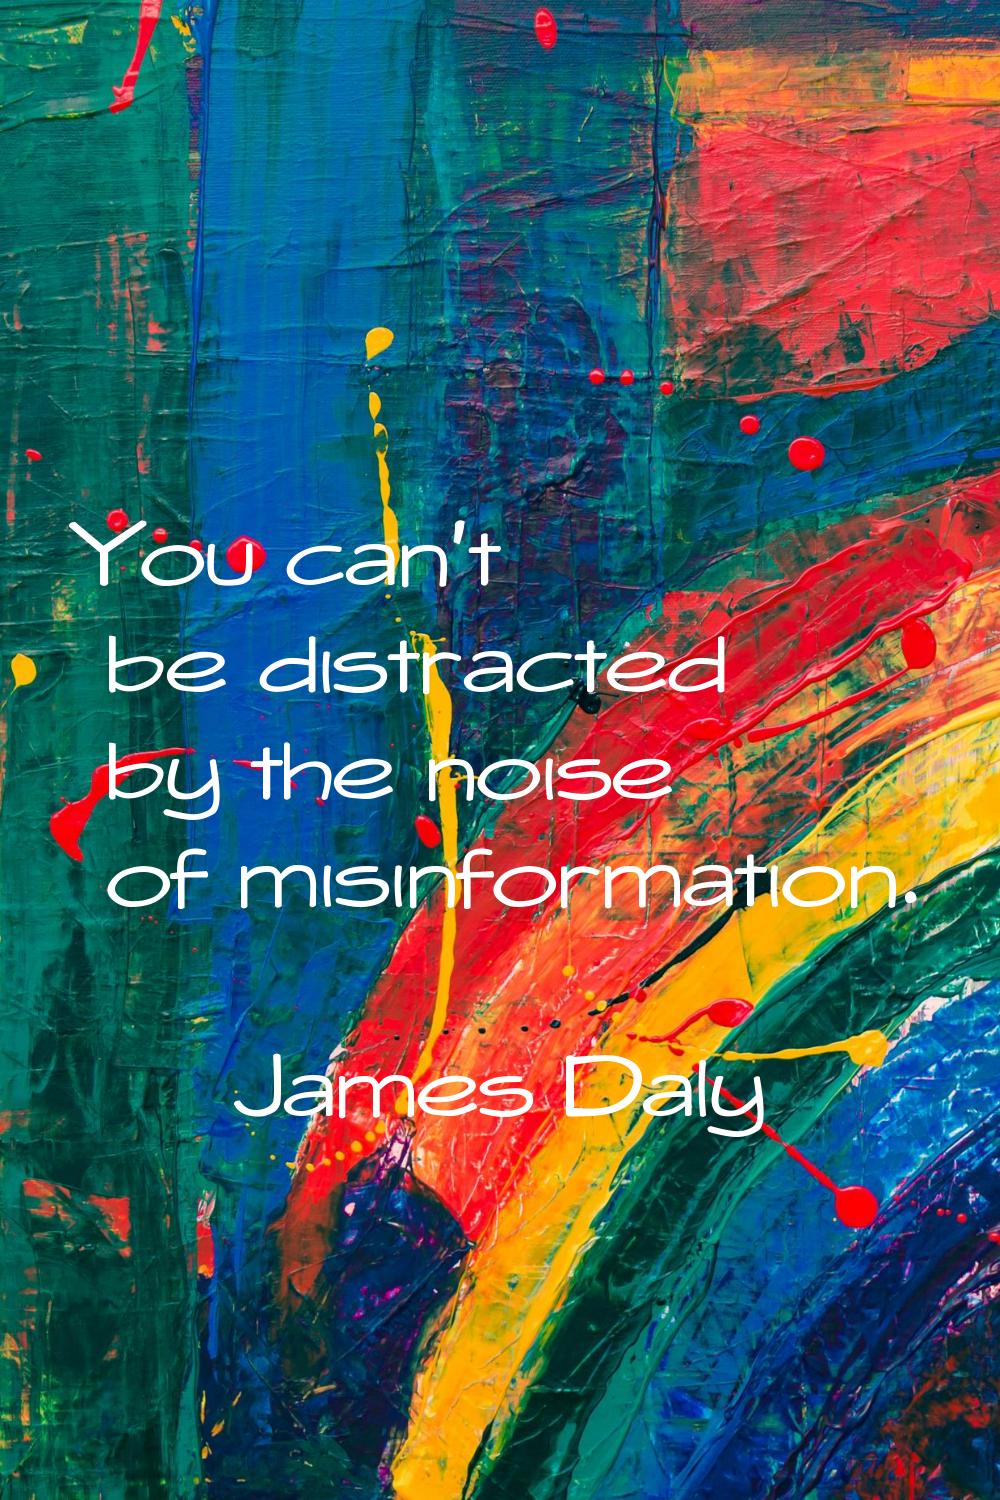 You can't be distracted by the noise of misinformation.